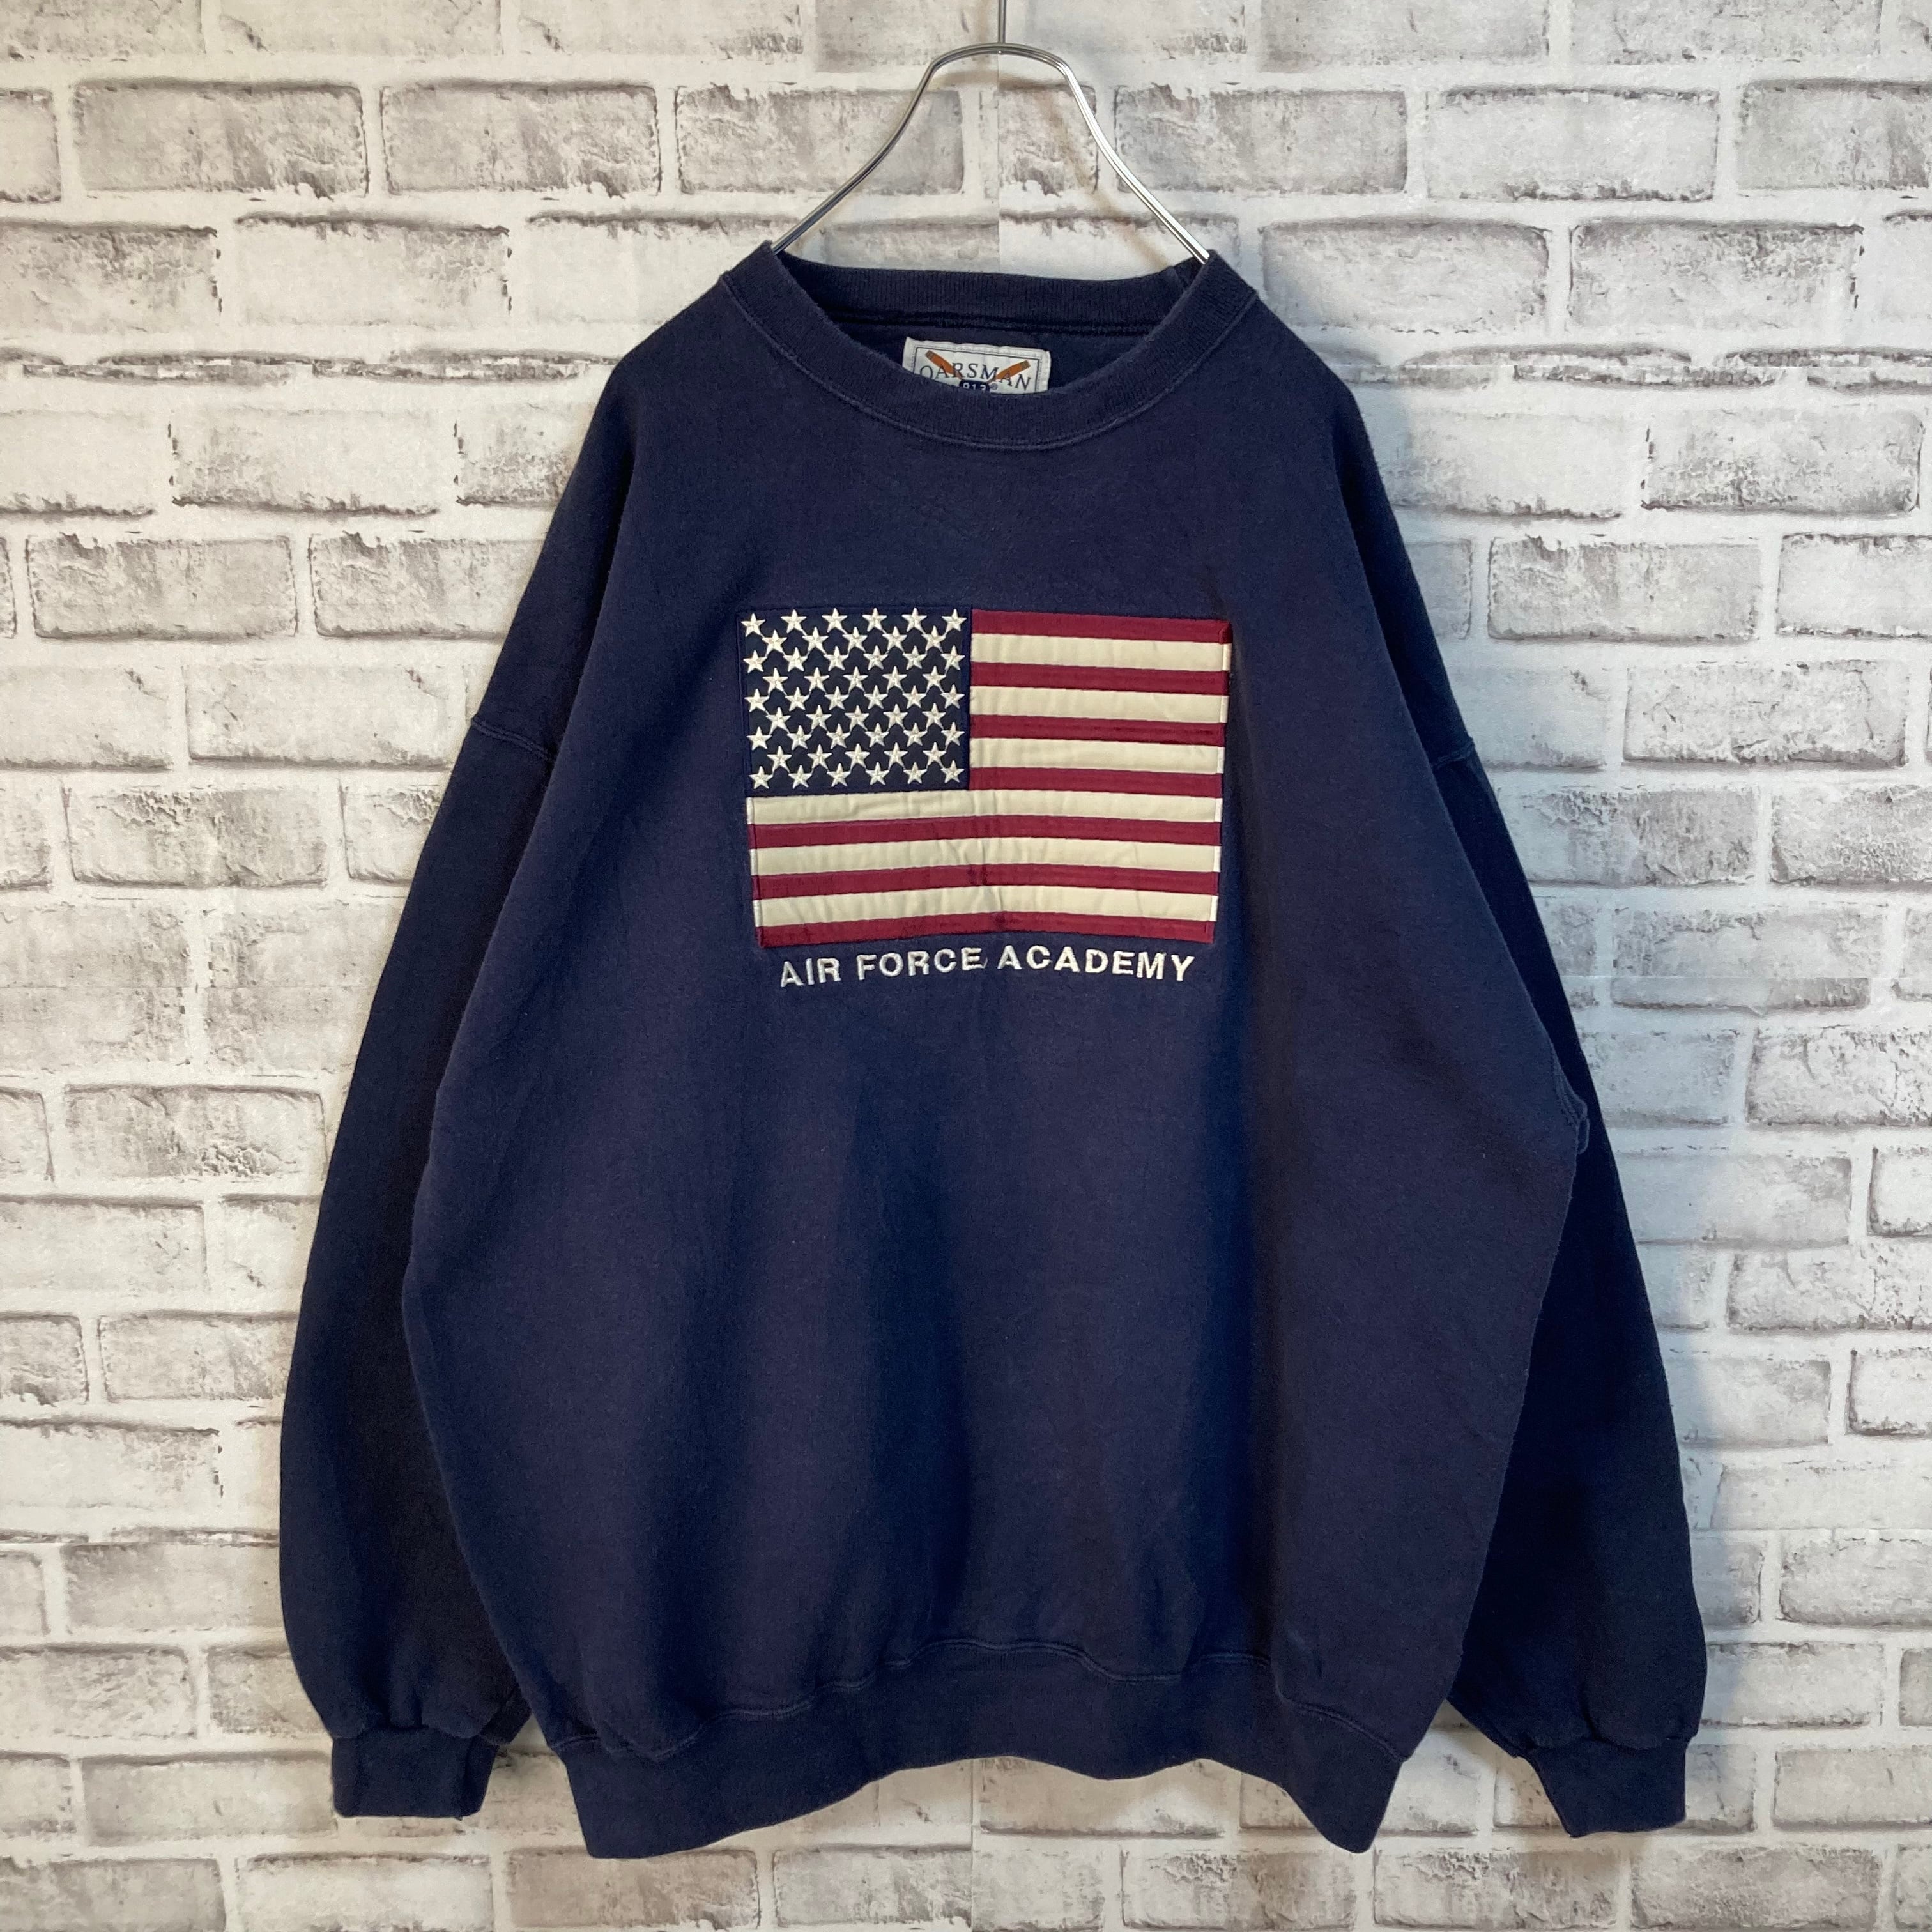 【OARSMAN913】L/S Sweat XL Made in USA 90s ”AIR FORCE ...